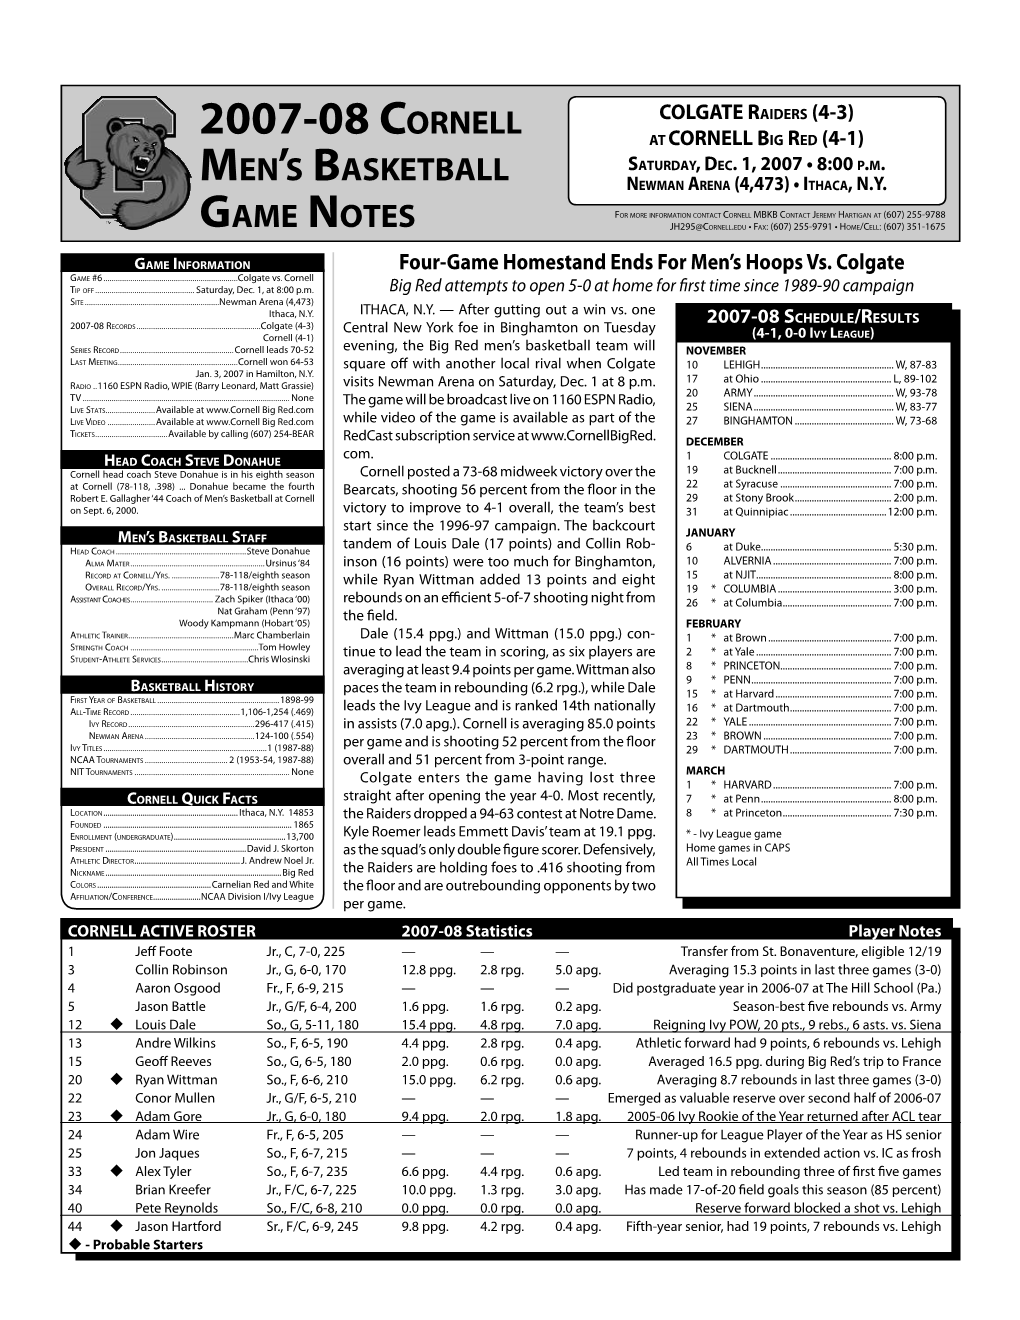 Cornell Game Notes Vs. Colgate • Newman Arena (Ithaca, N.Y.) Dec